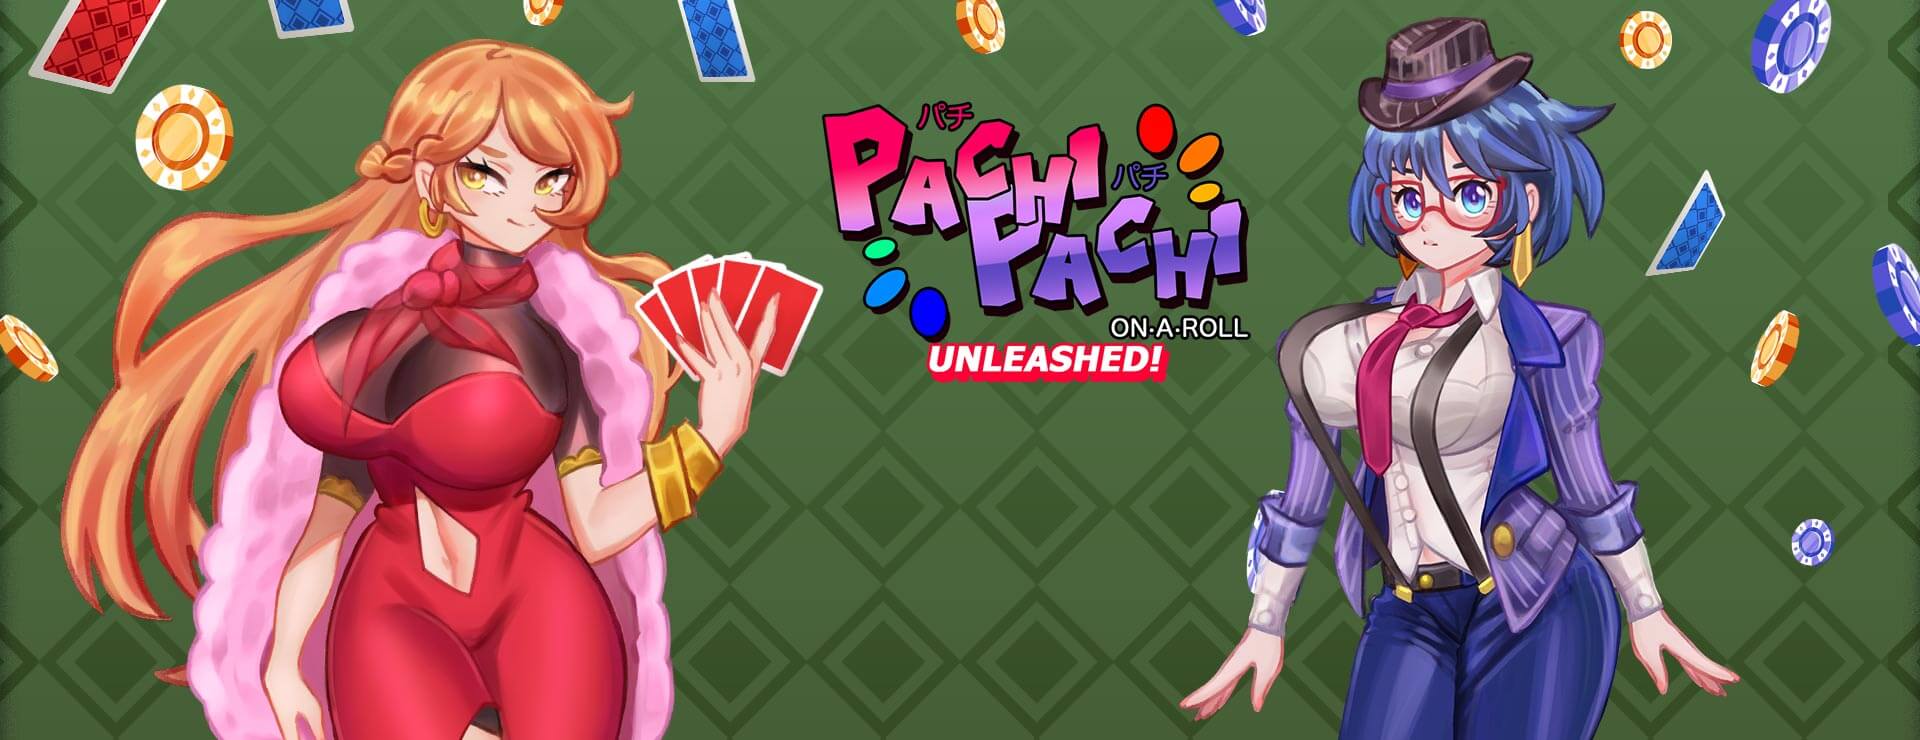 Pachi Pachi On A Roll Unleashed - カジュアル ゲーム